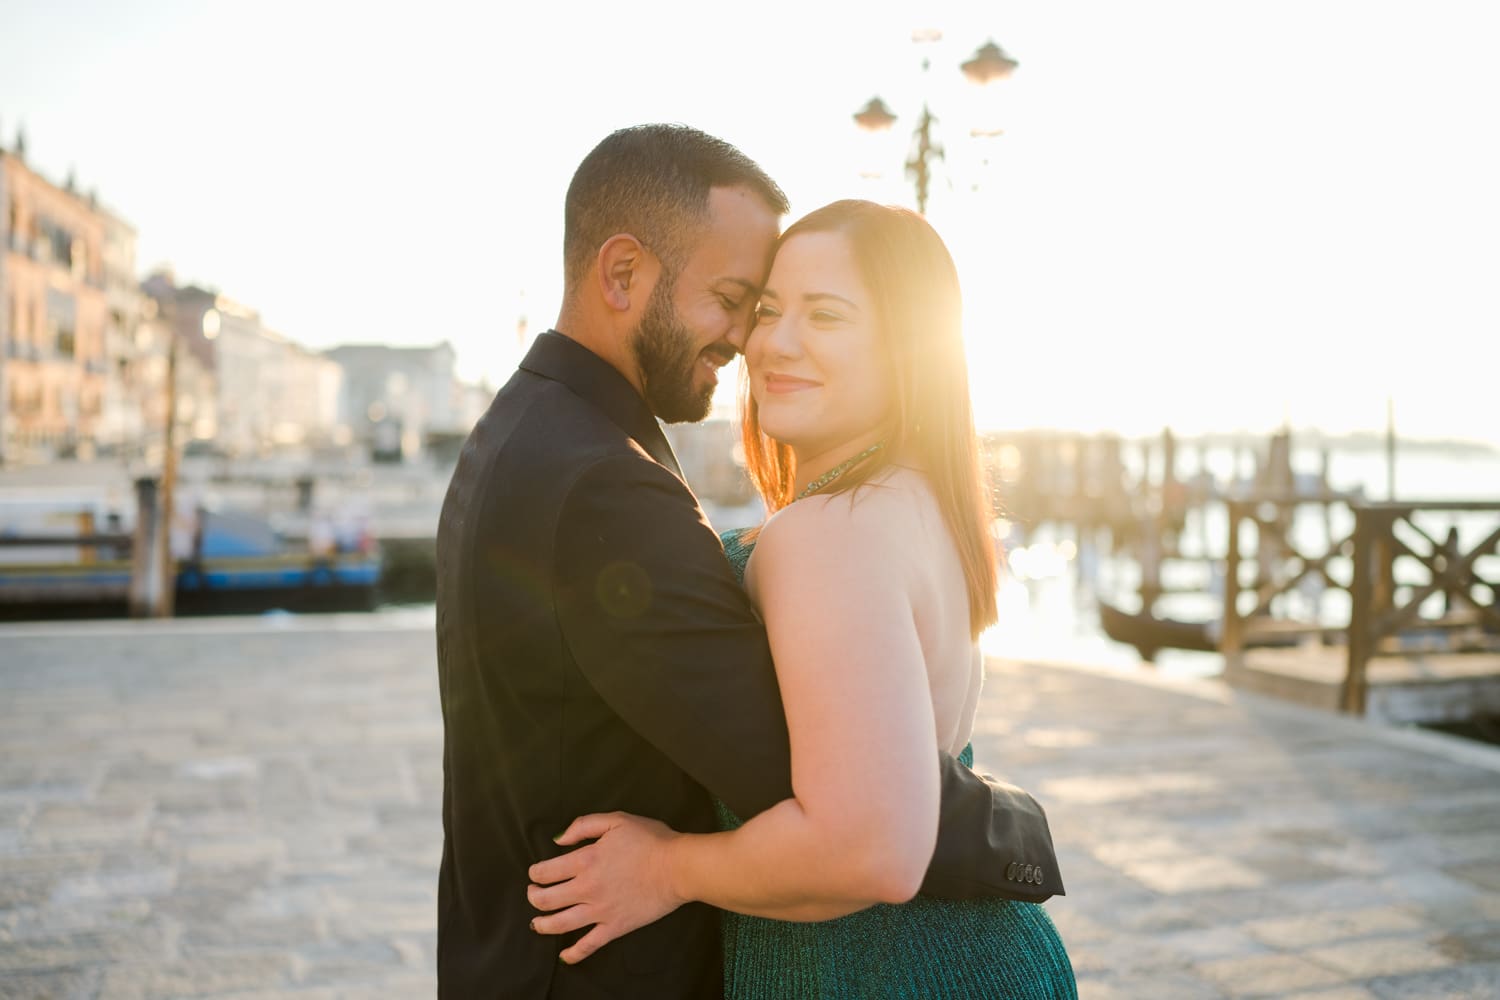 surprise proposal engagement photos in venice italy